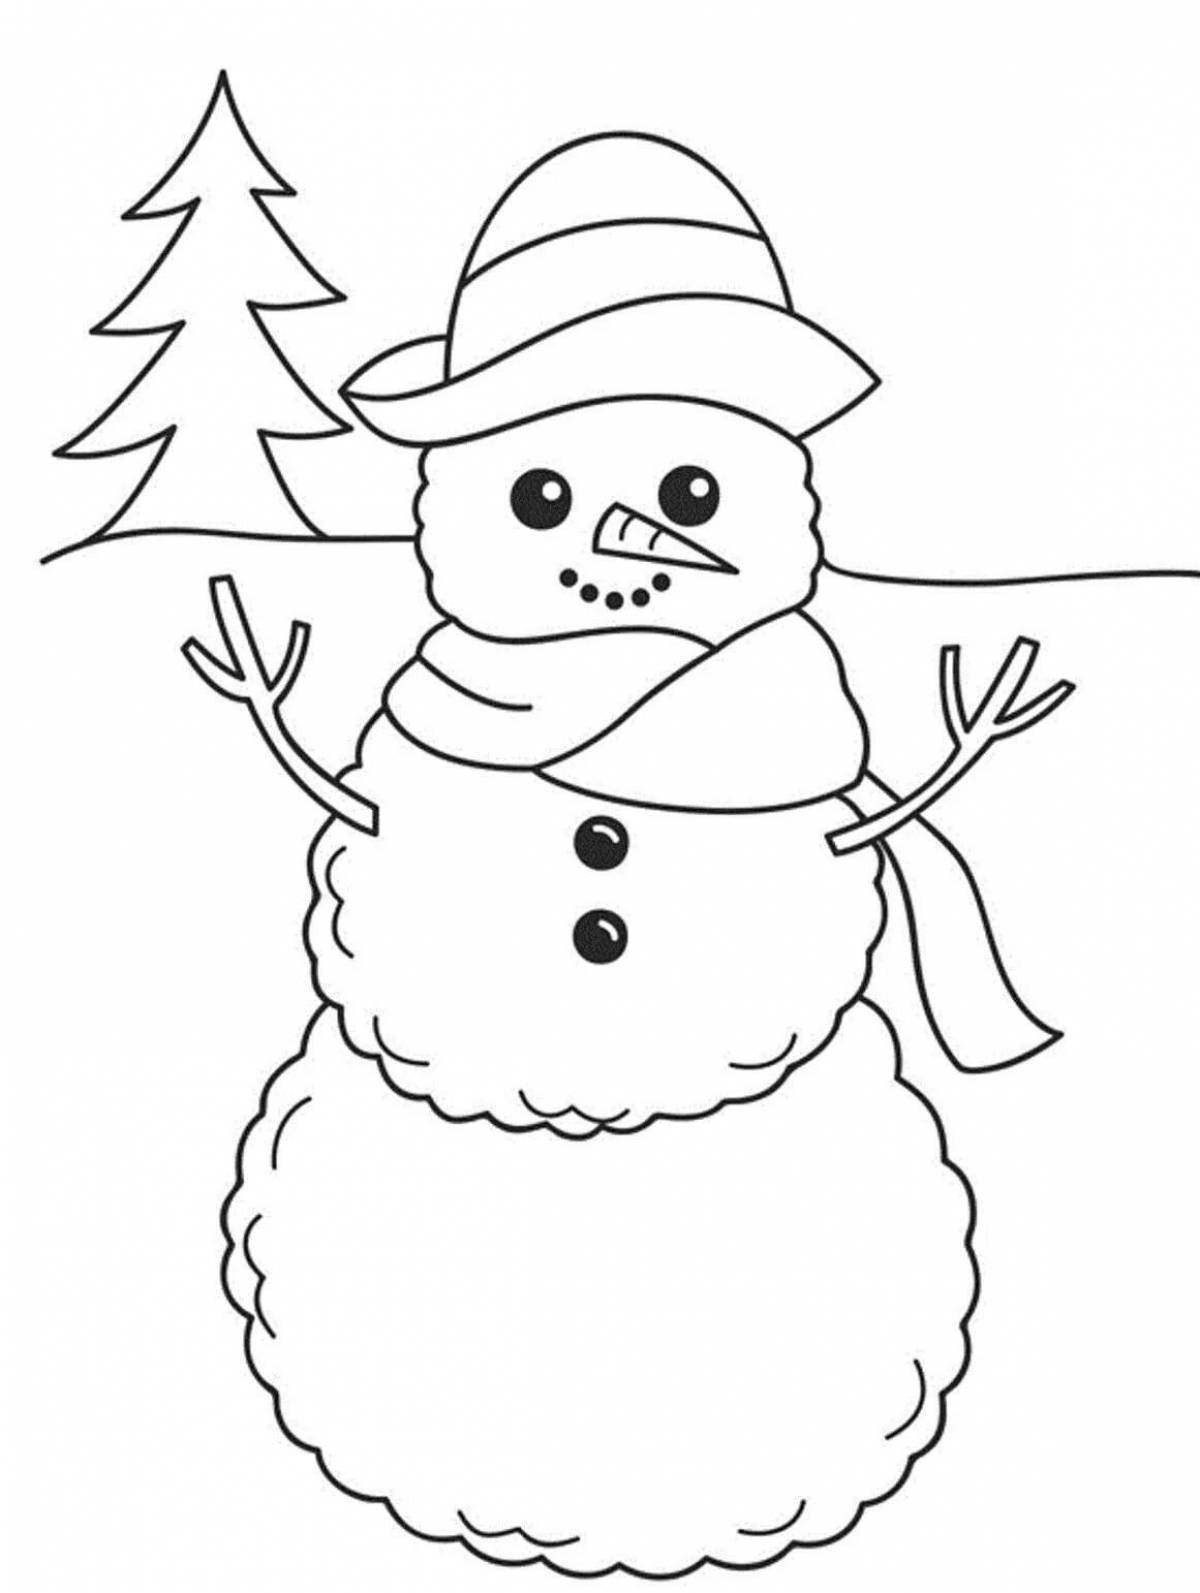 Glam tree and snowman coloring page